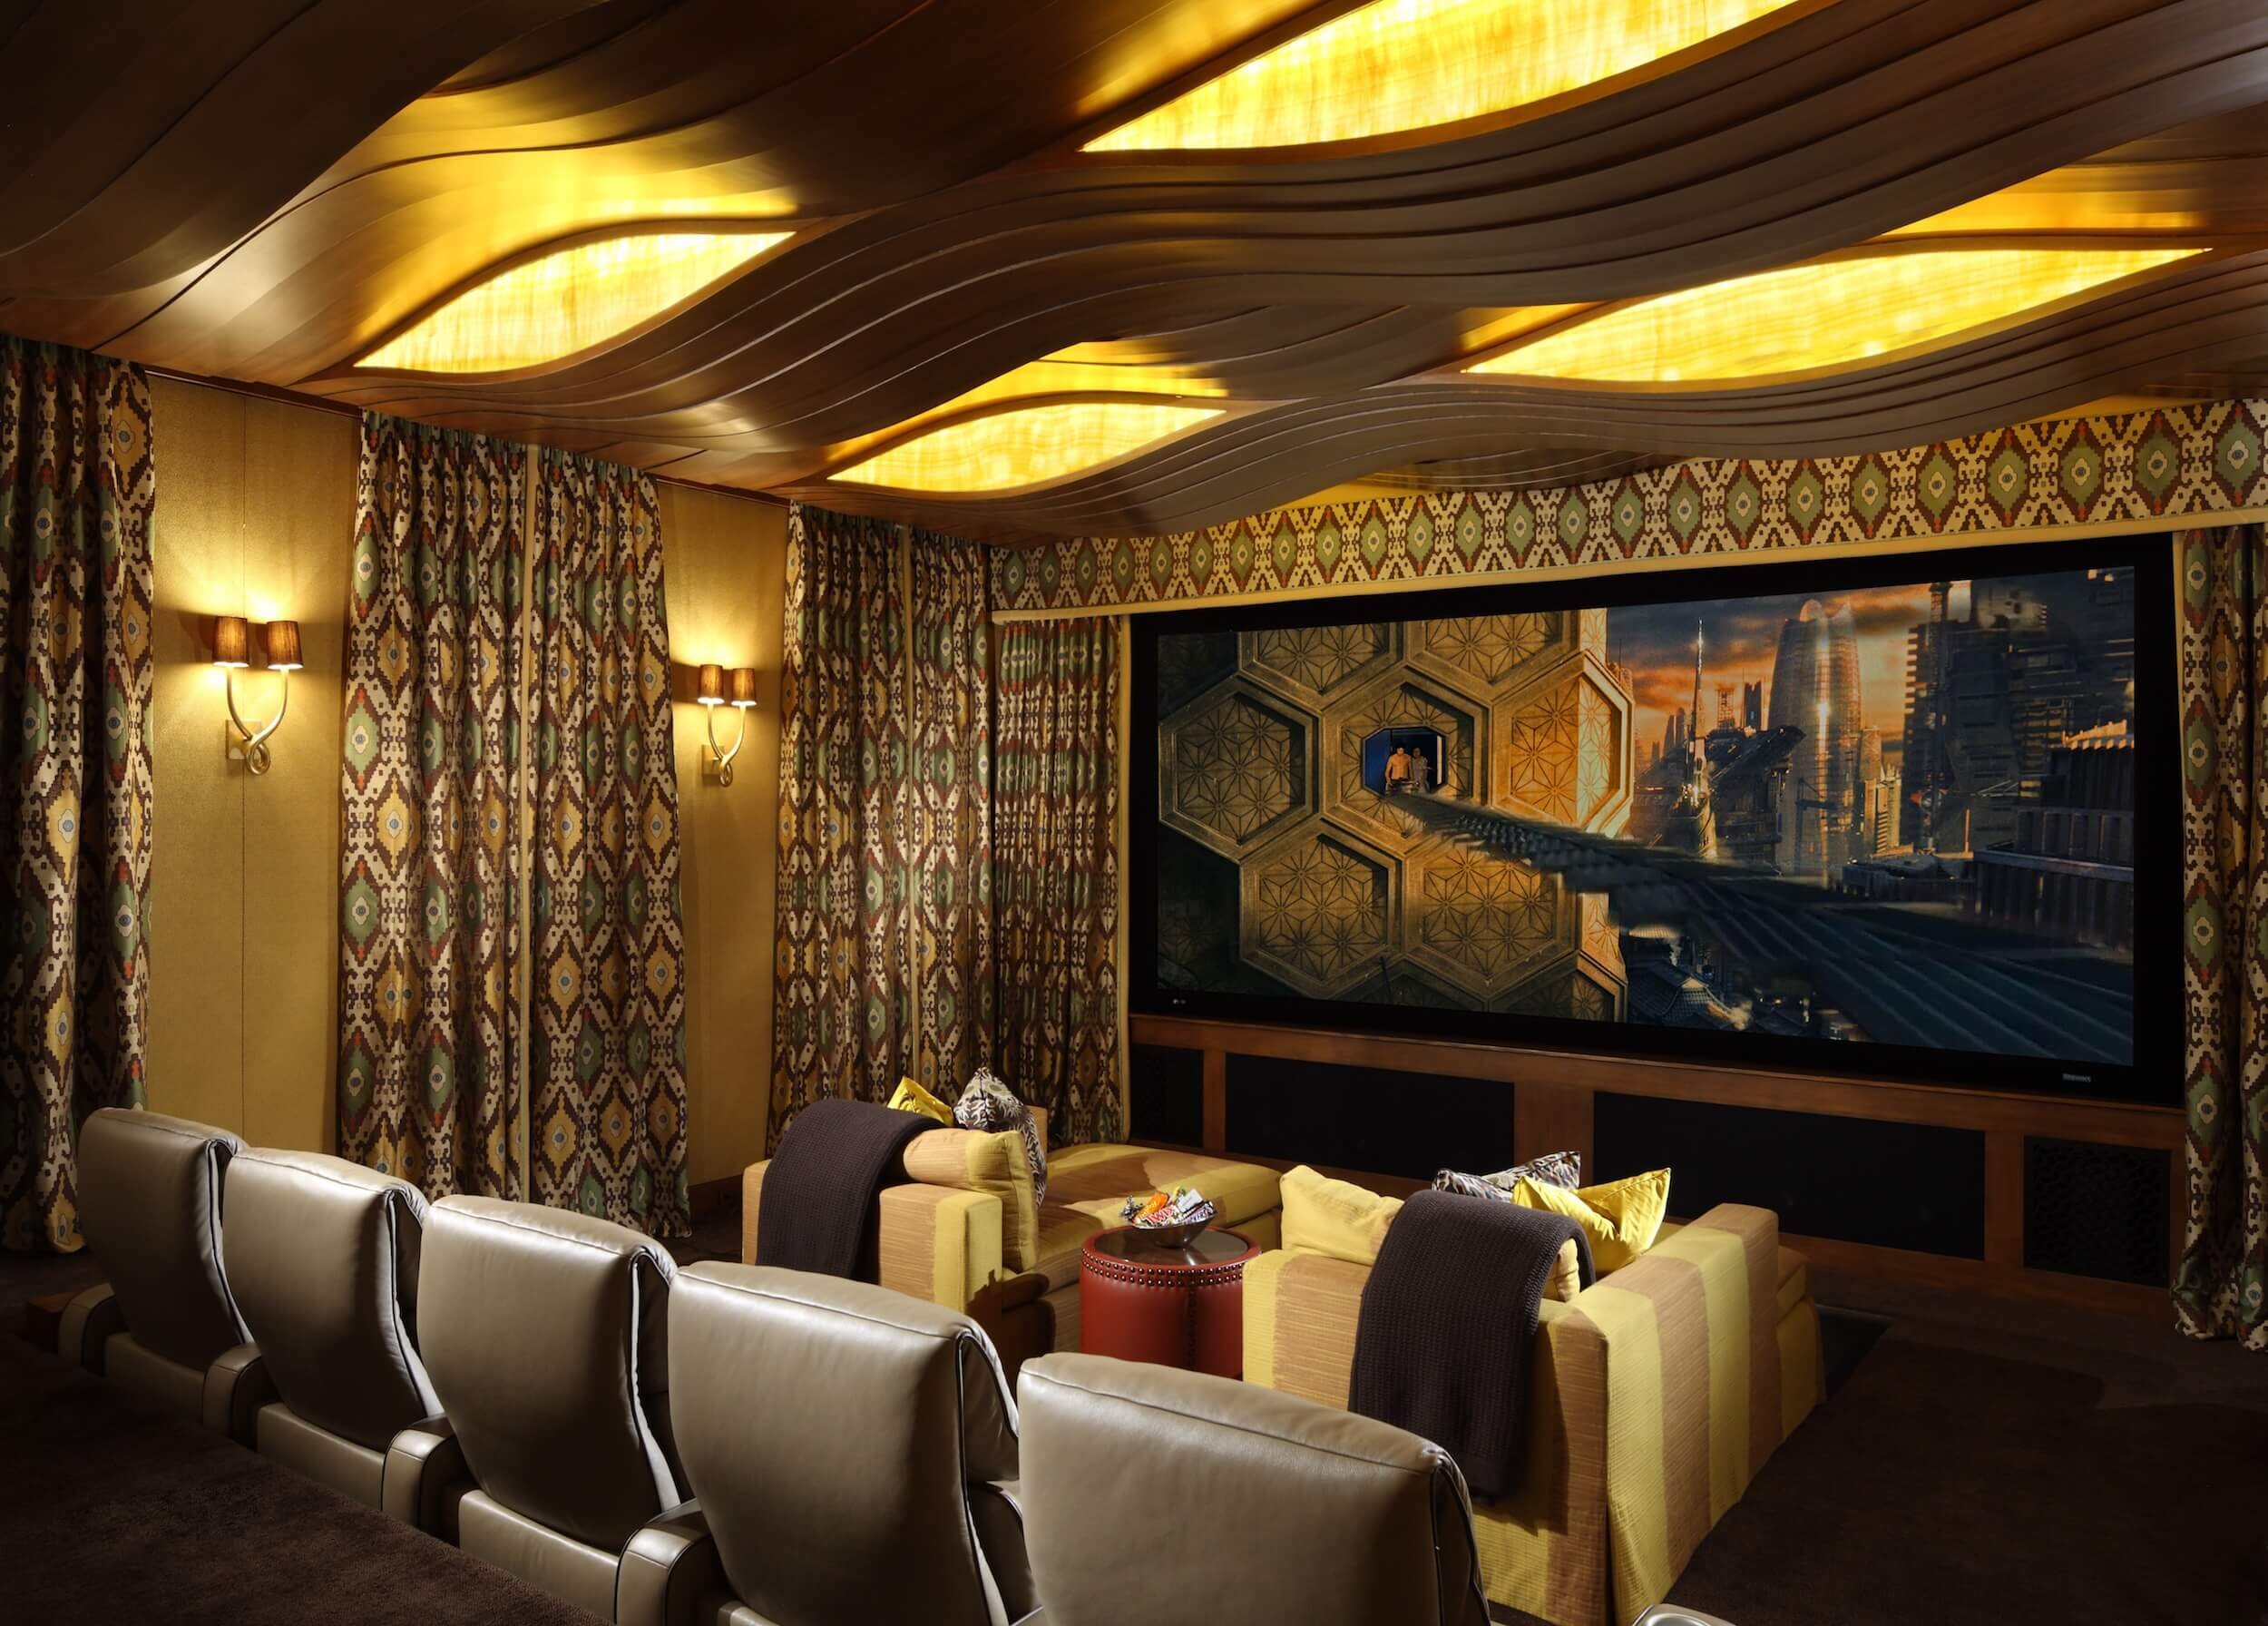 Theater with upholstered walls, leather upholstery seating and custom drapery.